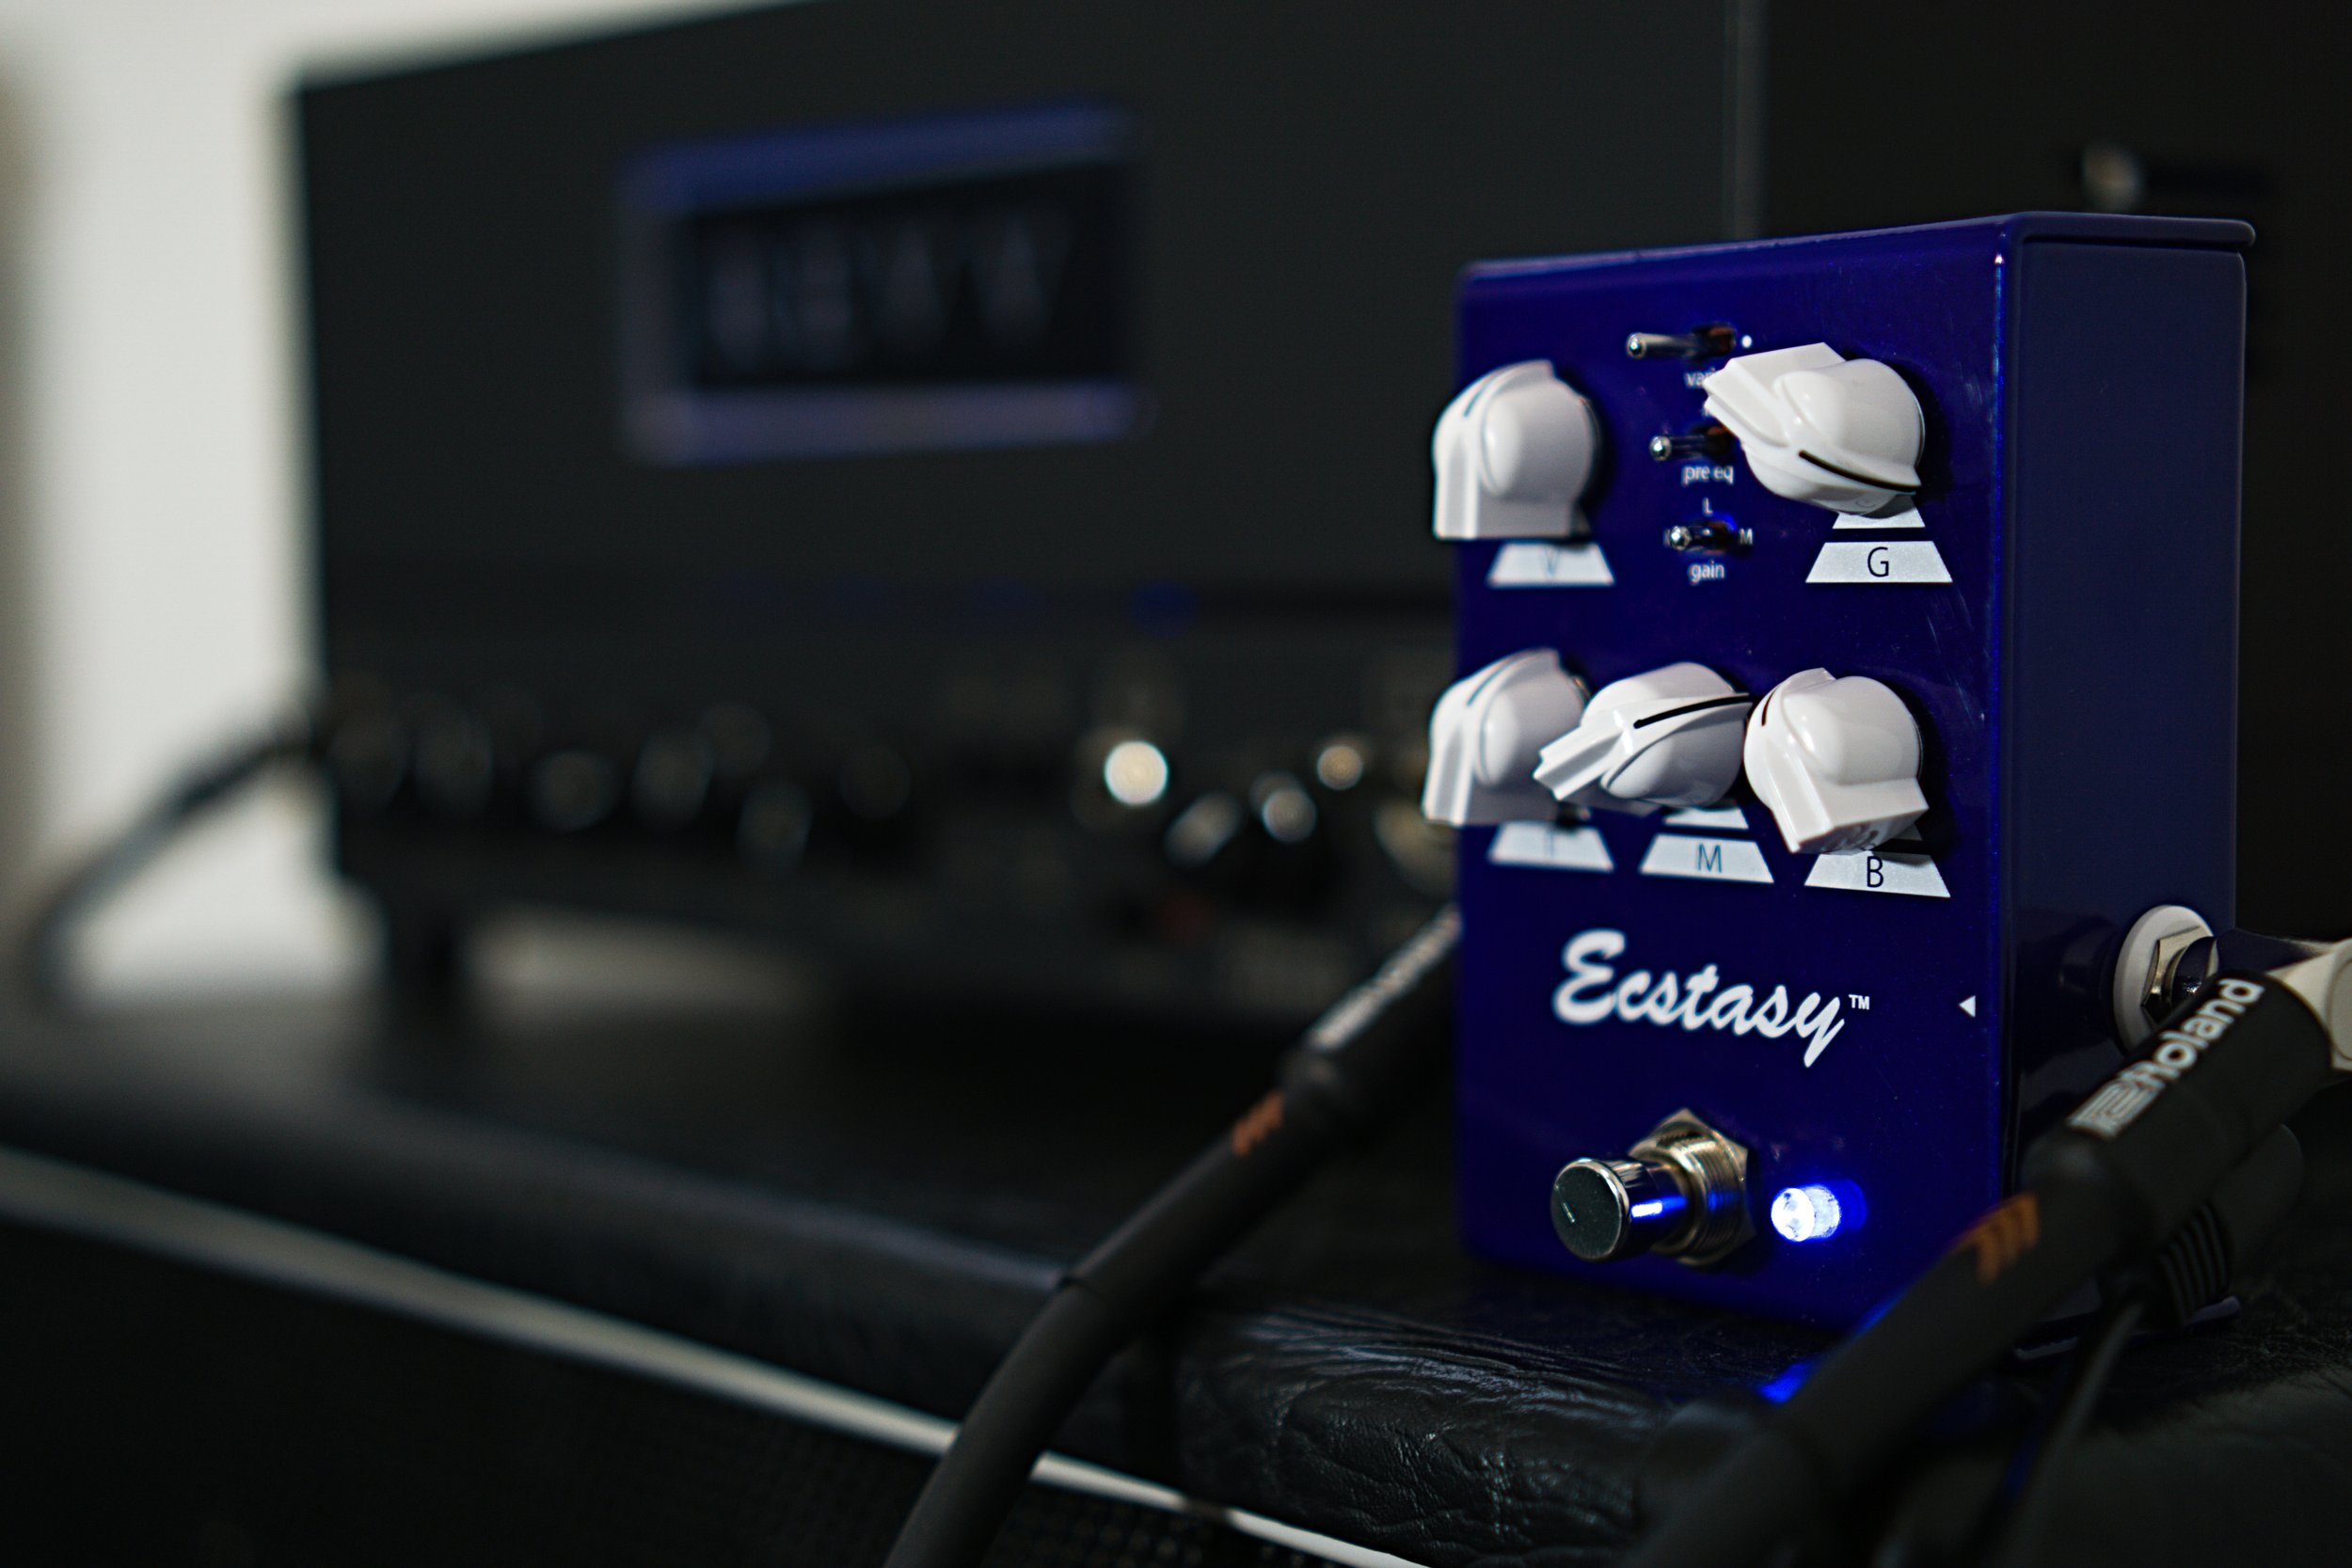 Bogner Ecstasy Blue Mini Review — The Gear Check